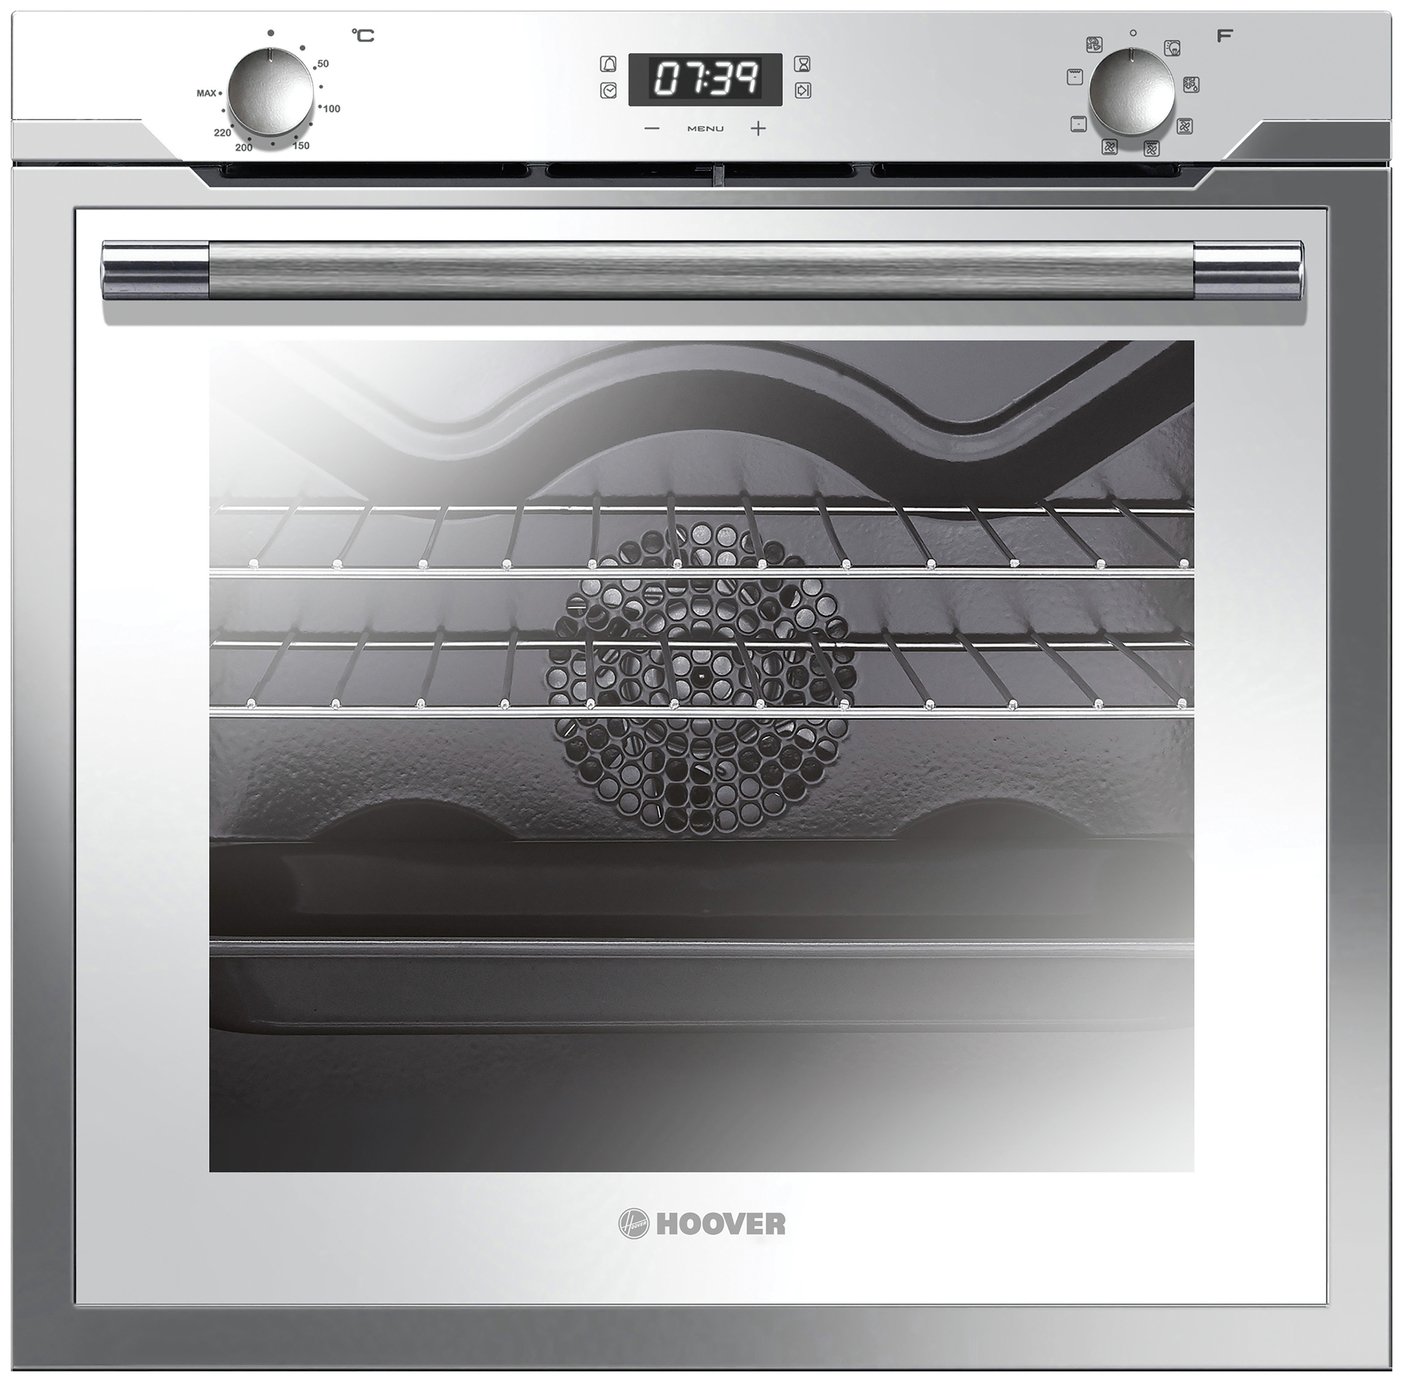 Hoover HOAZ7150WI Single Electric Oven review